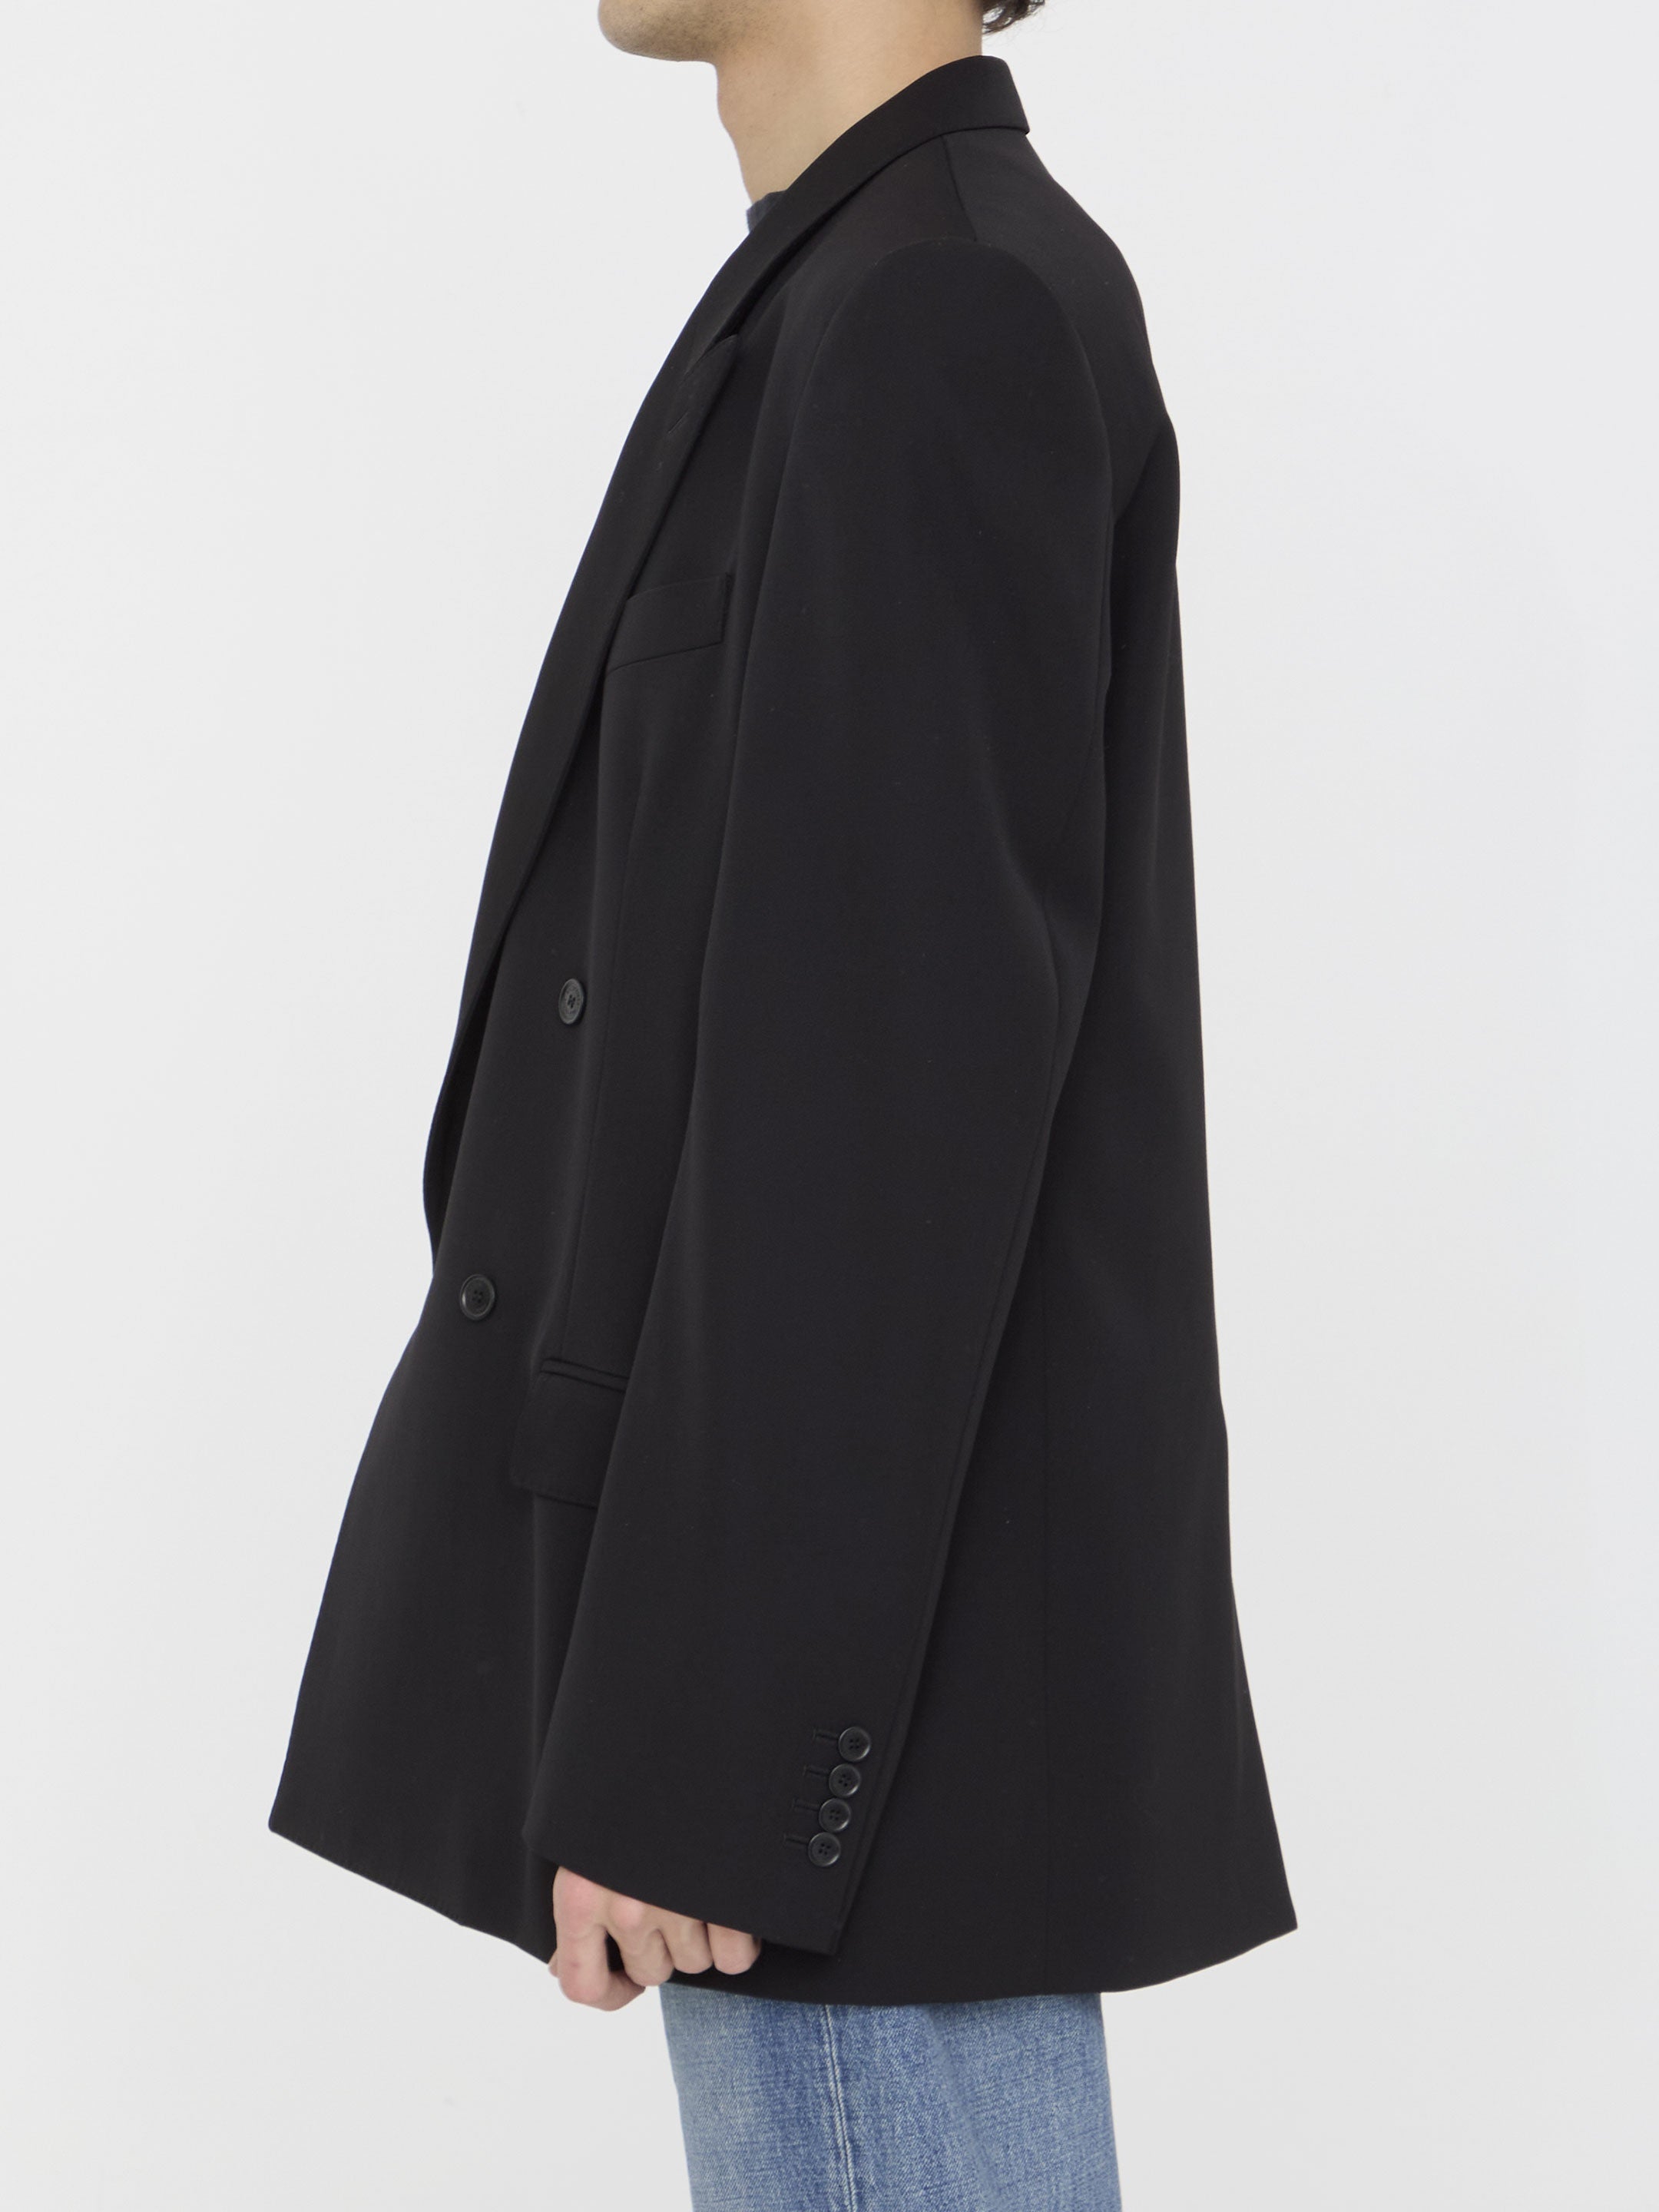 BALENCIAGA-OUTLET-SALE-Oversized-Blazer-CLOTHING-XS-BLACK-ARCHIVE-COLLECTION-3.jpg